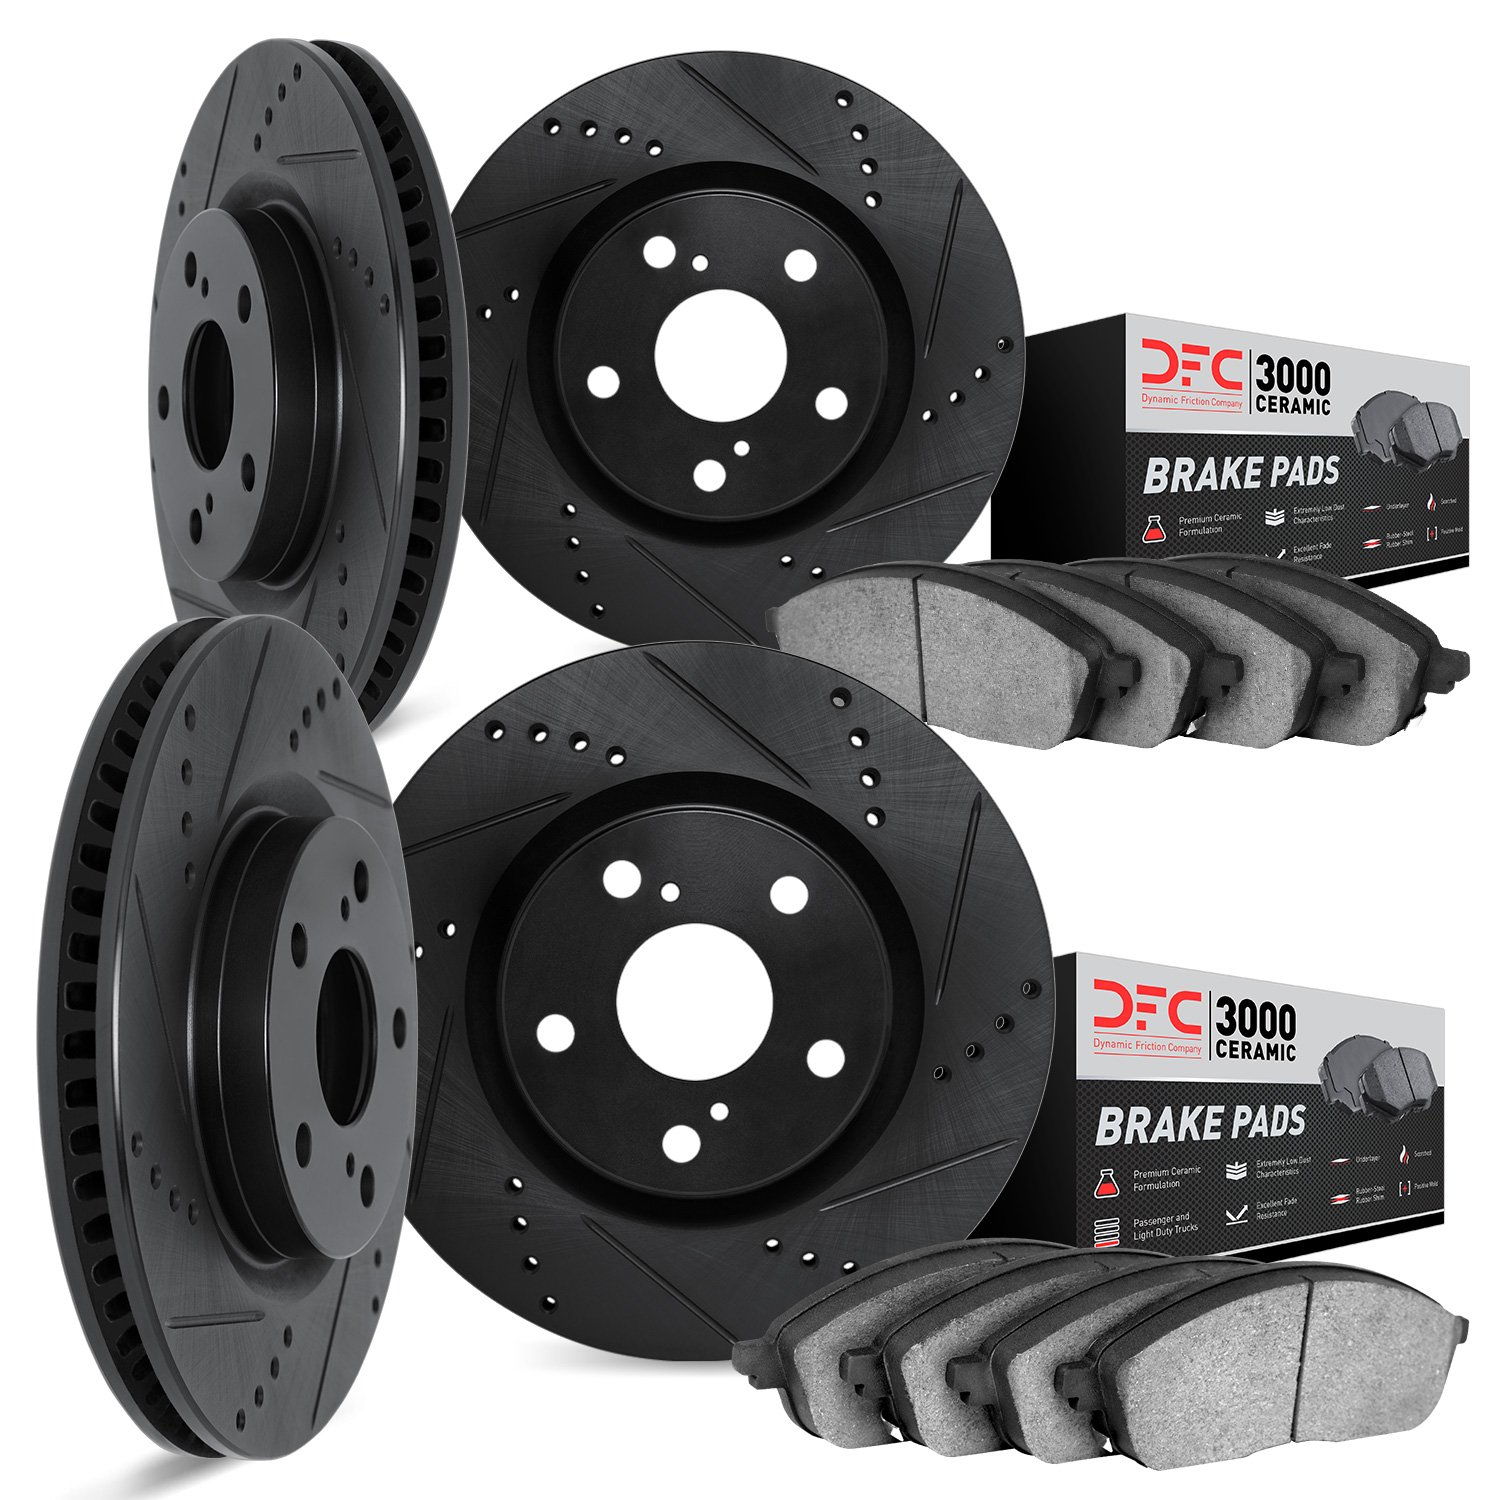 8304-75026 Drilled/Slotted Brake Rotors with 3000-Series Ceramic Brake Pads Kit [Black], Fits Select Lexus/Toyota/Scion, Positio